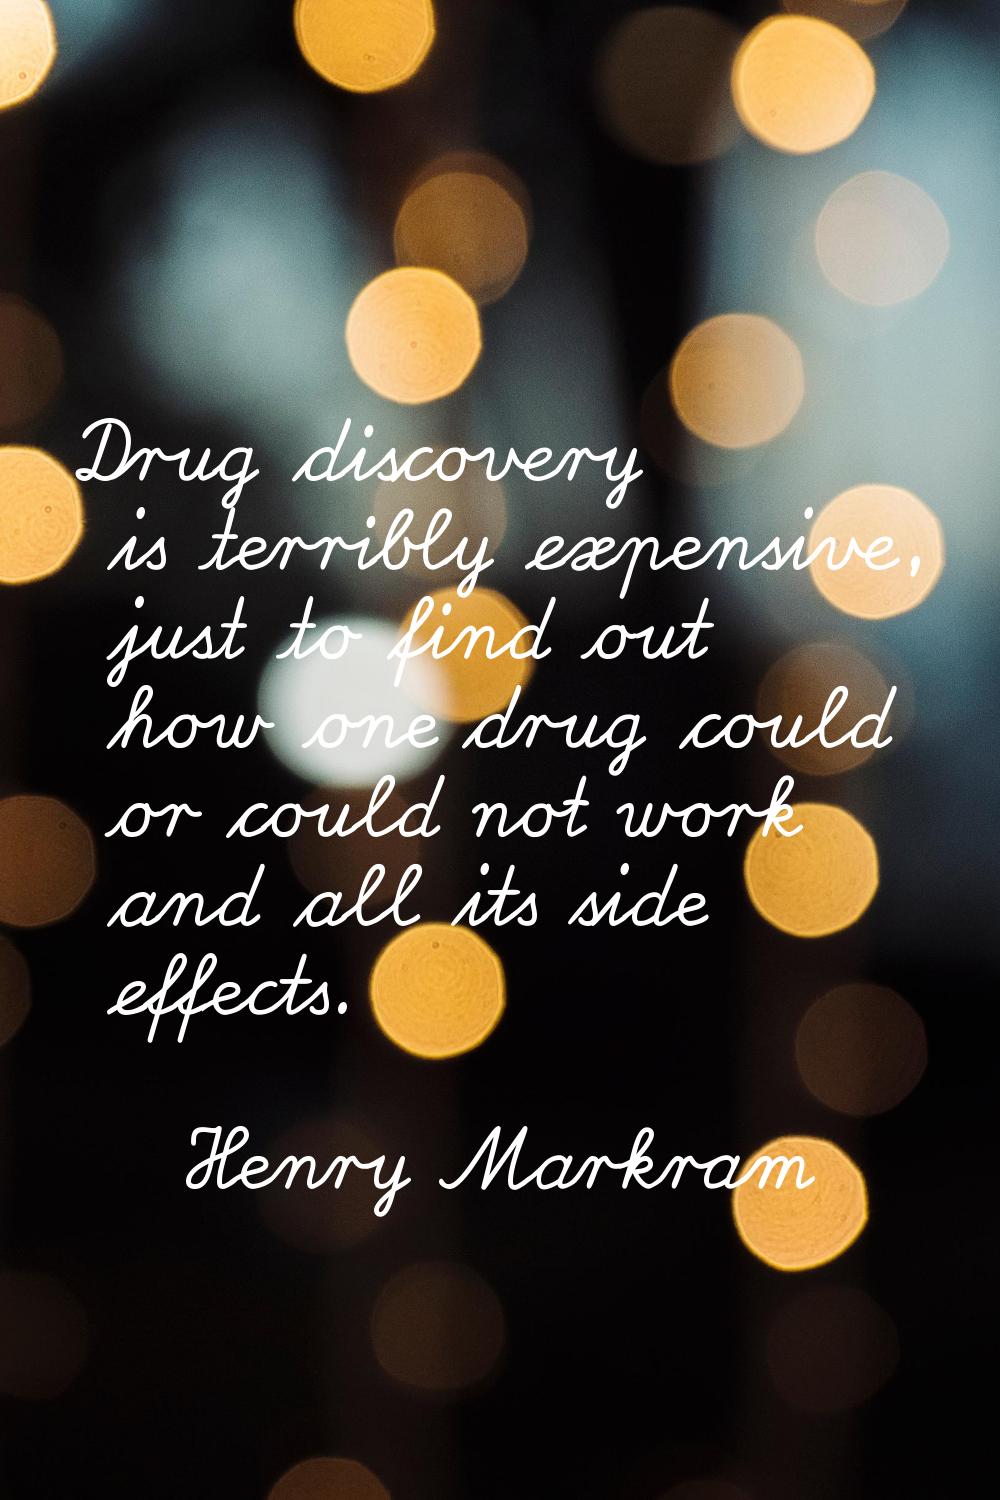 Drug discovery is terribly expensive, just to find out how one drug could or could not work and all